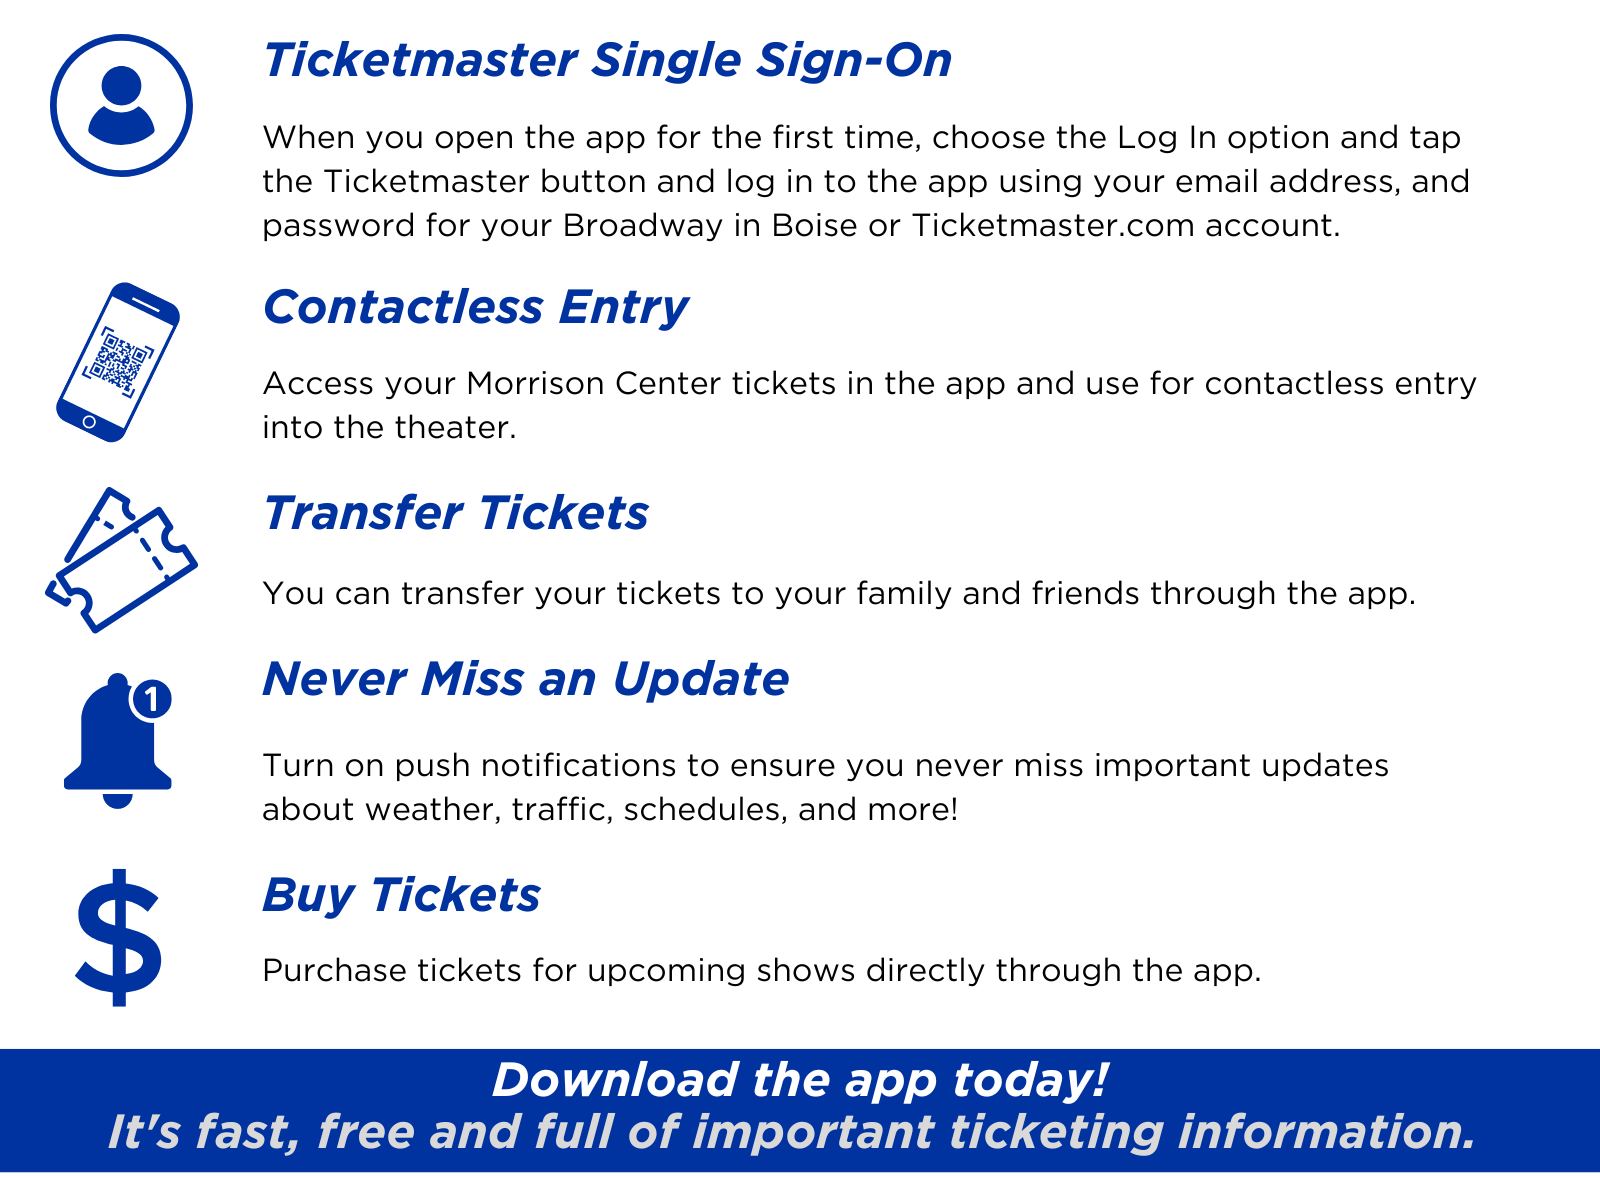 The Morrison Center App offers contactless entry, the ability to purchase and transfer tickets, and receive updates regarding weather and traffic.